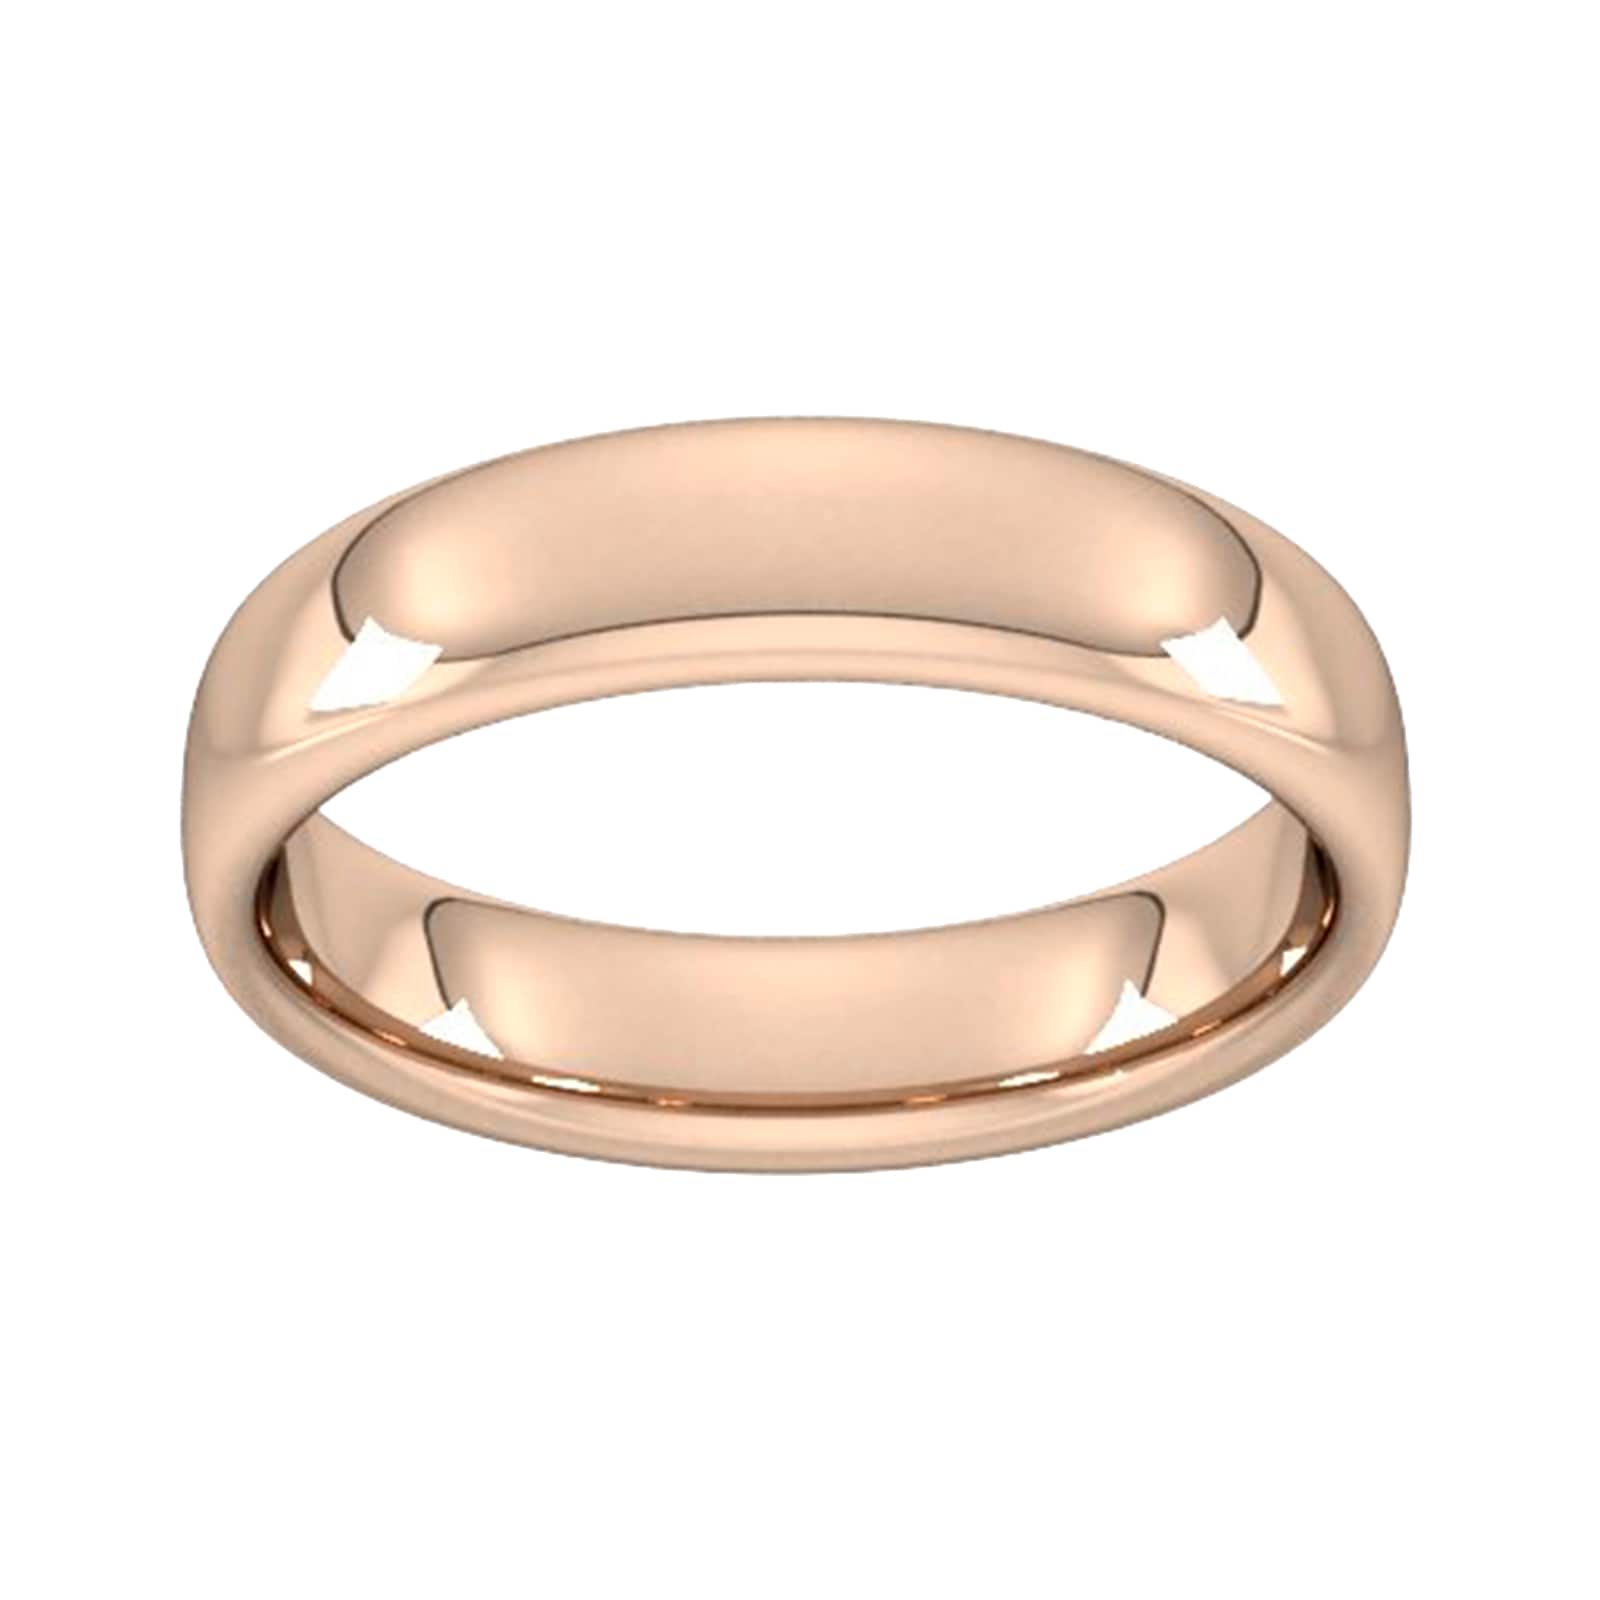 5mm Slight Court Heavy Wedding Ring In 9 Carat Rose Gold - Ring Size P